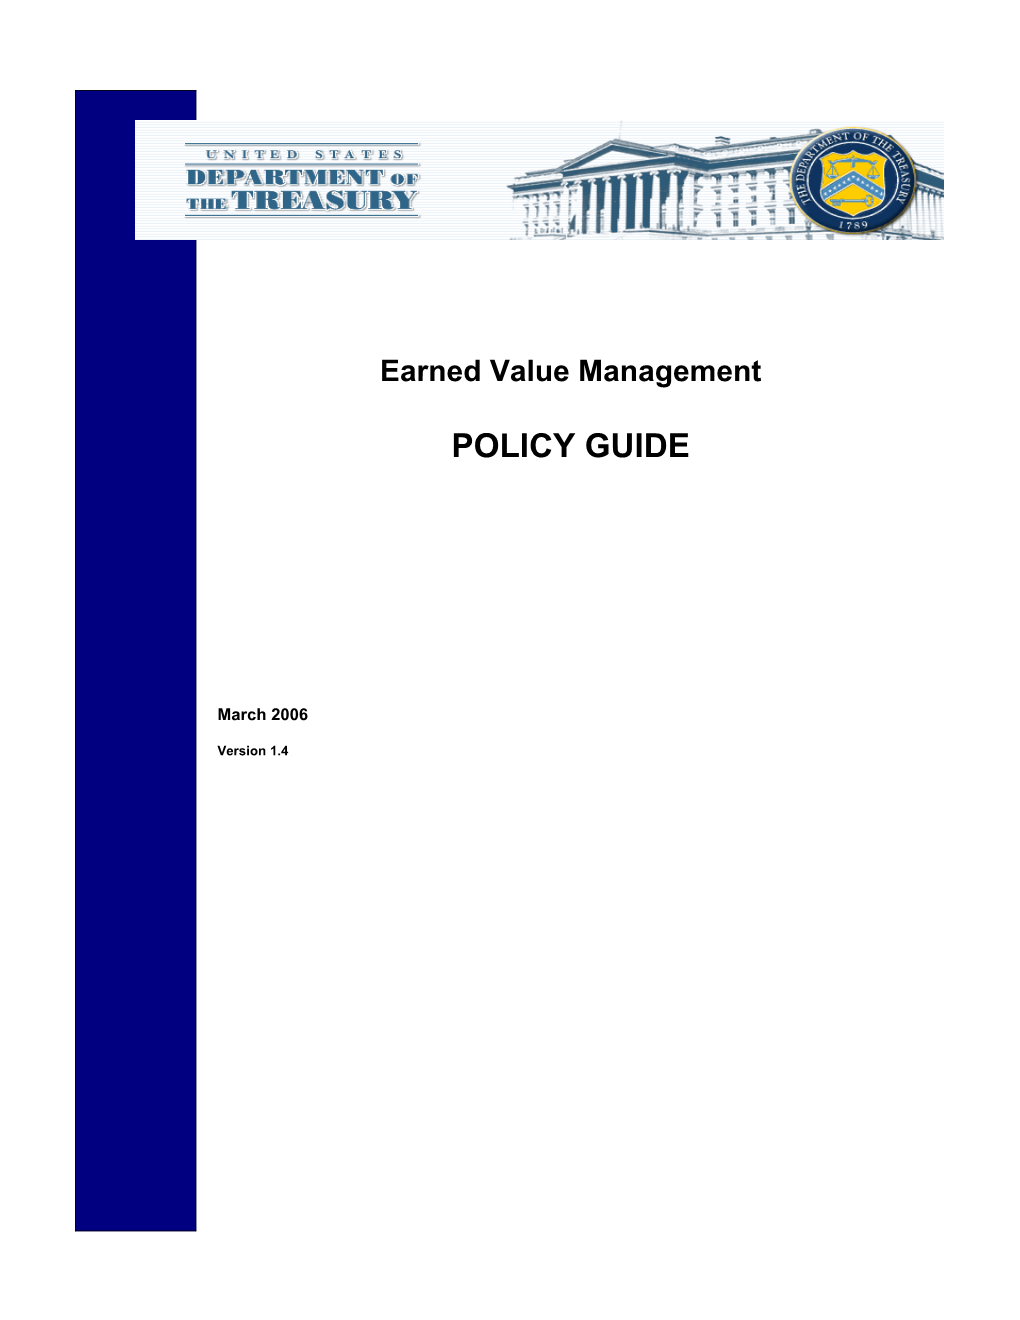 Treasury Earned Value Management (EVM) Policy Guide - Mar 06